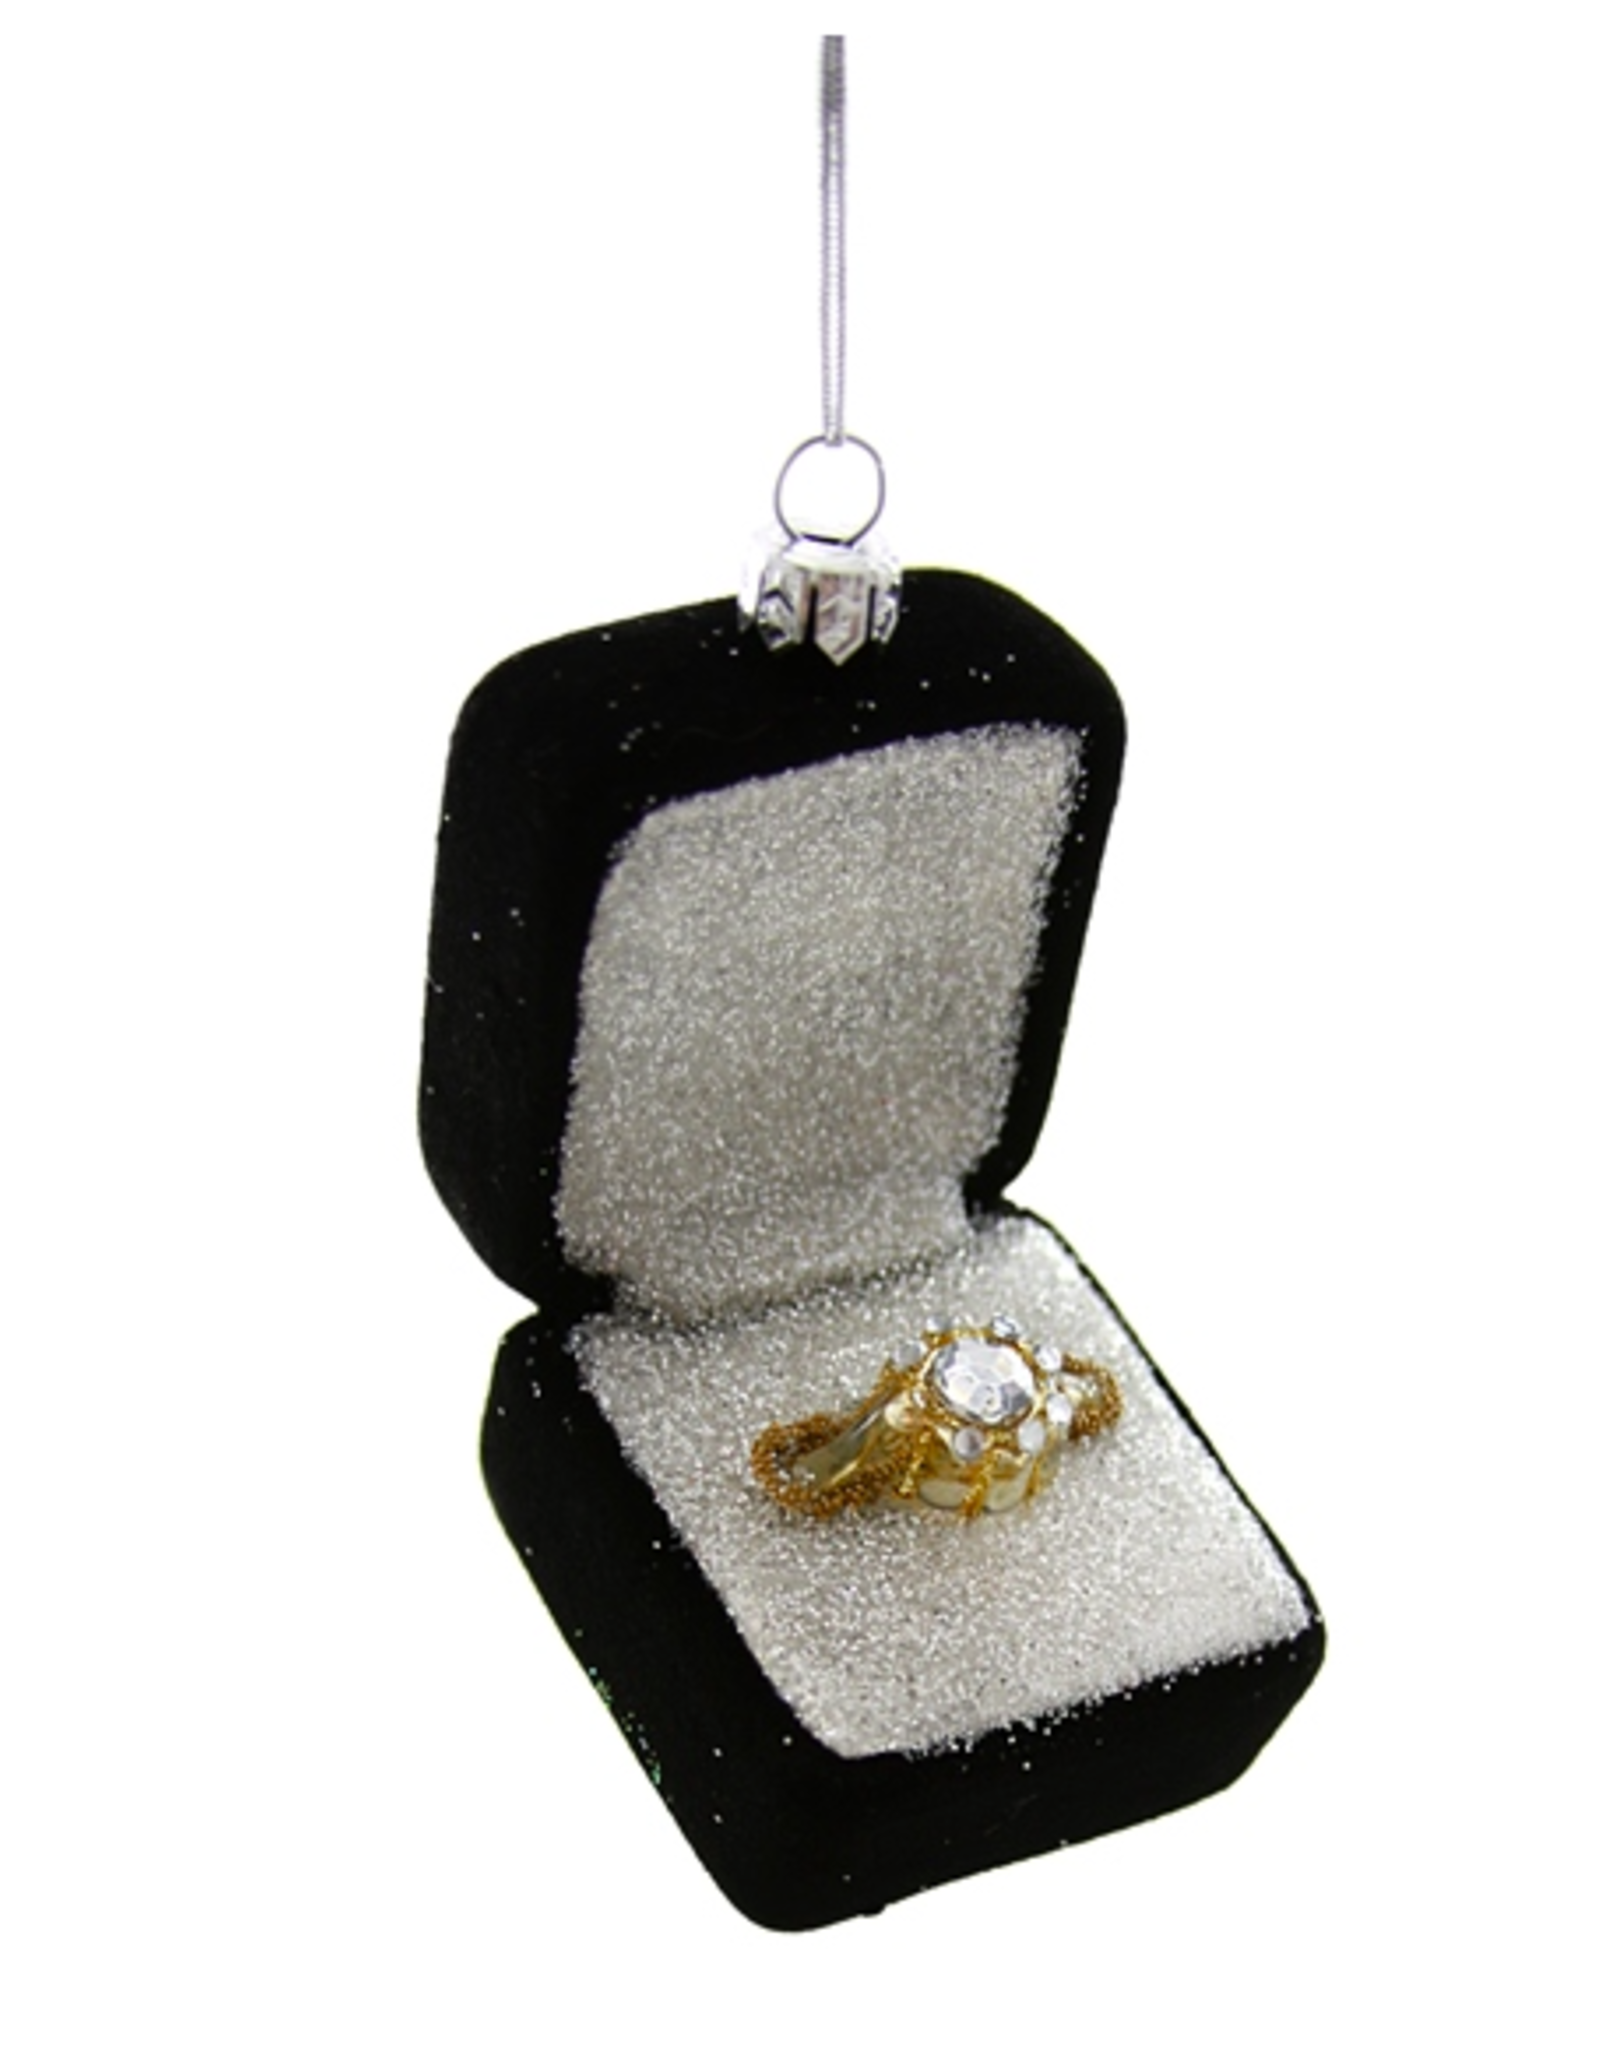 Engagement Ring in Black Box Ornament